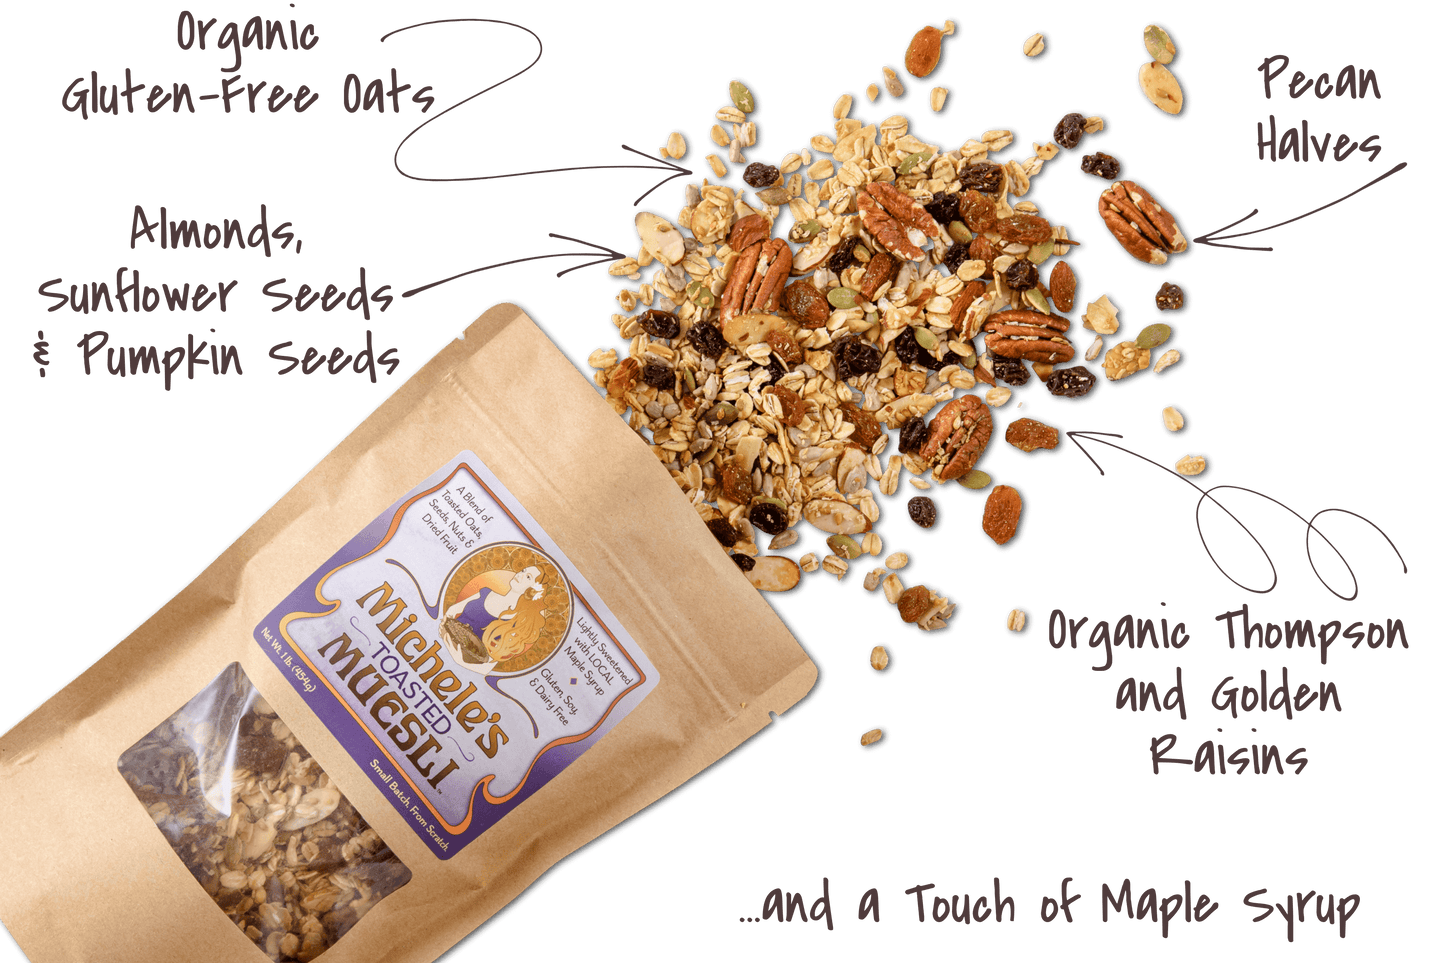 Organic and natural ingredients in Michele's Toasted Muesli